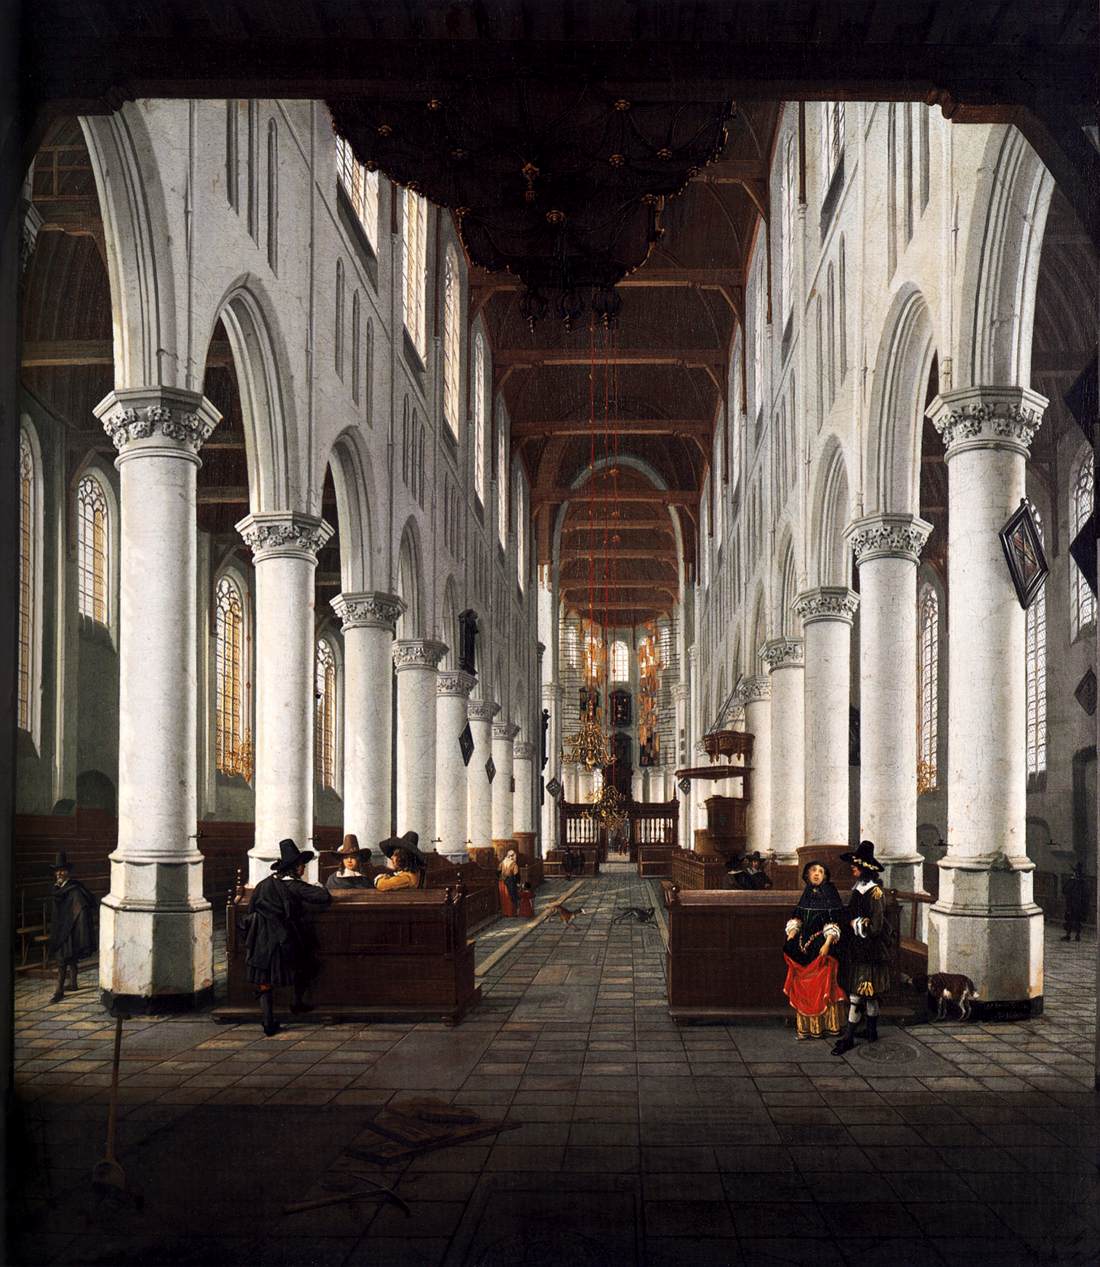 Interior of the Nieuwe Kerk, Delft, From Below the Organ in the West Entrance